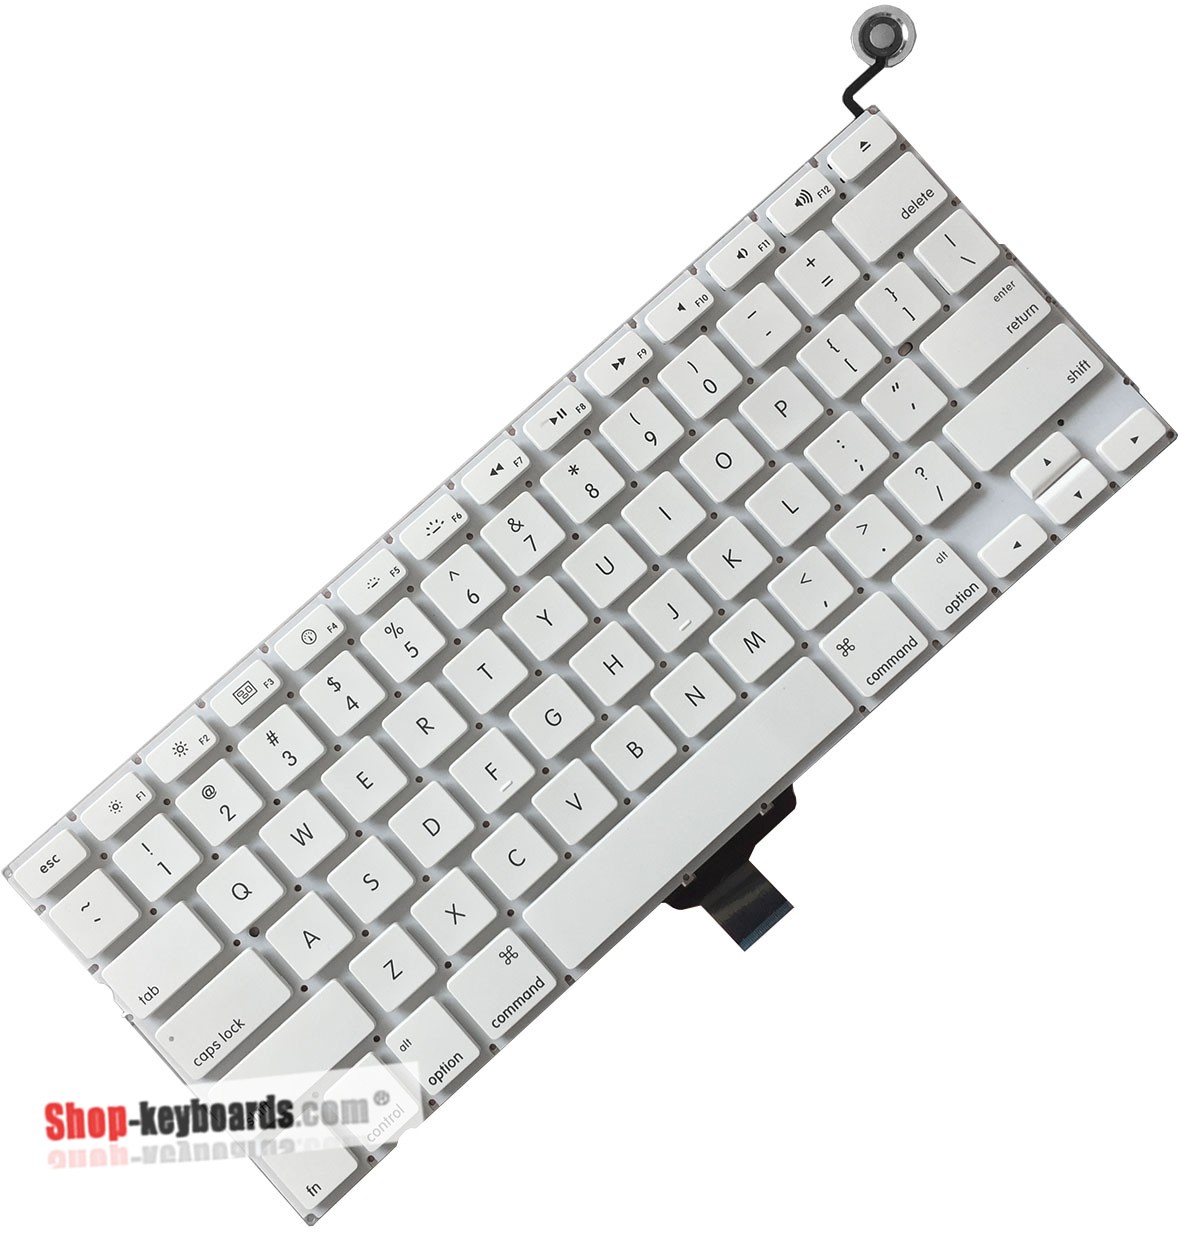 Apple MACBOOK UNIBODY 13 INCH A1342 (LATE 2009) Keyboard replacement